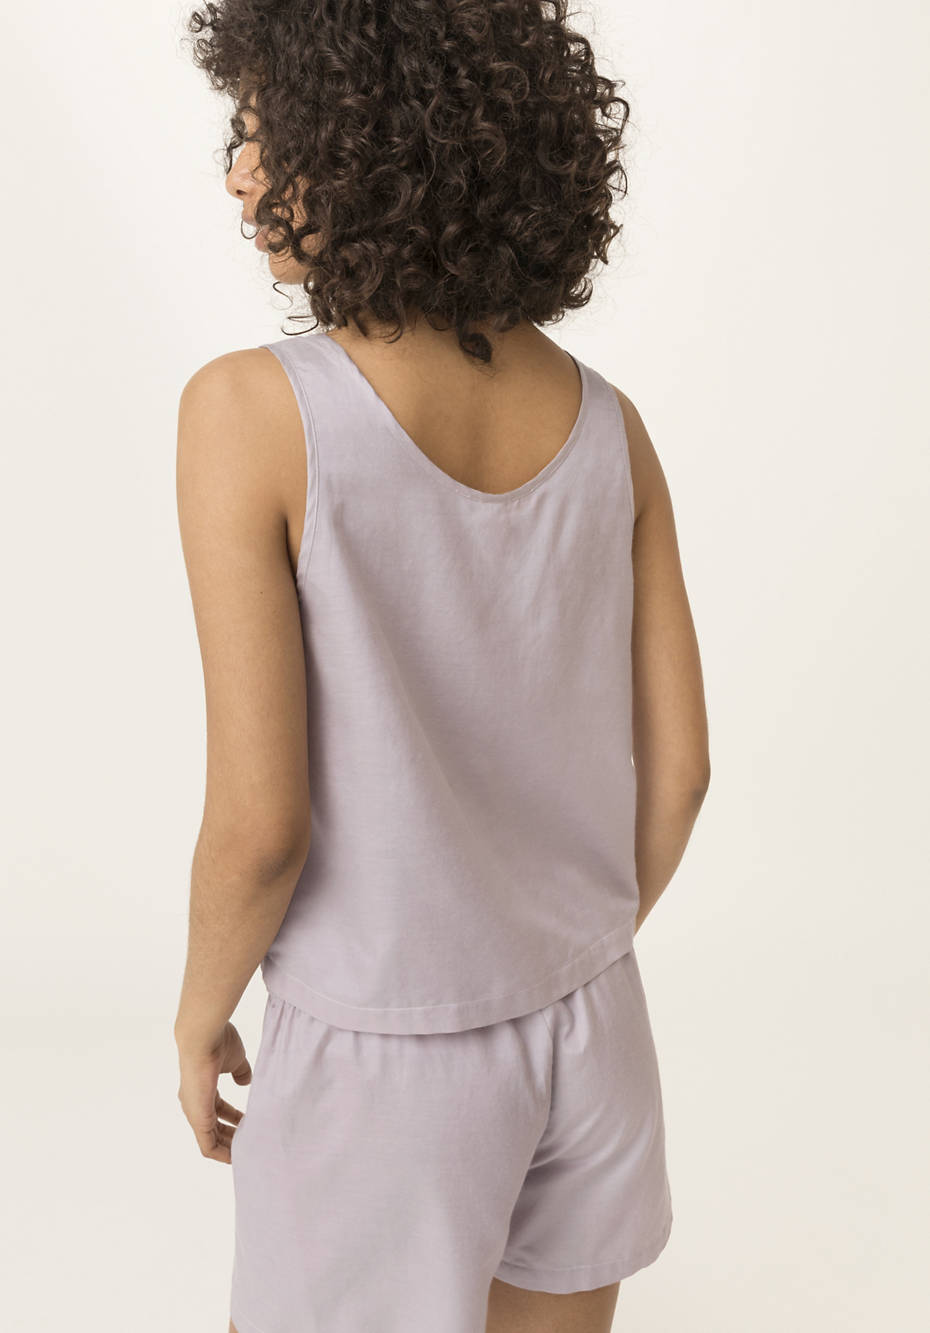 Tank top made from organic cotton with silk